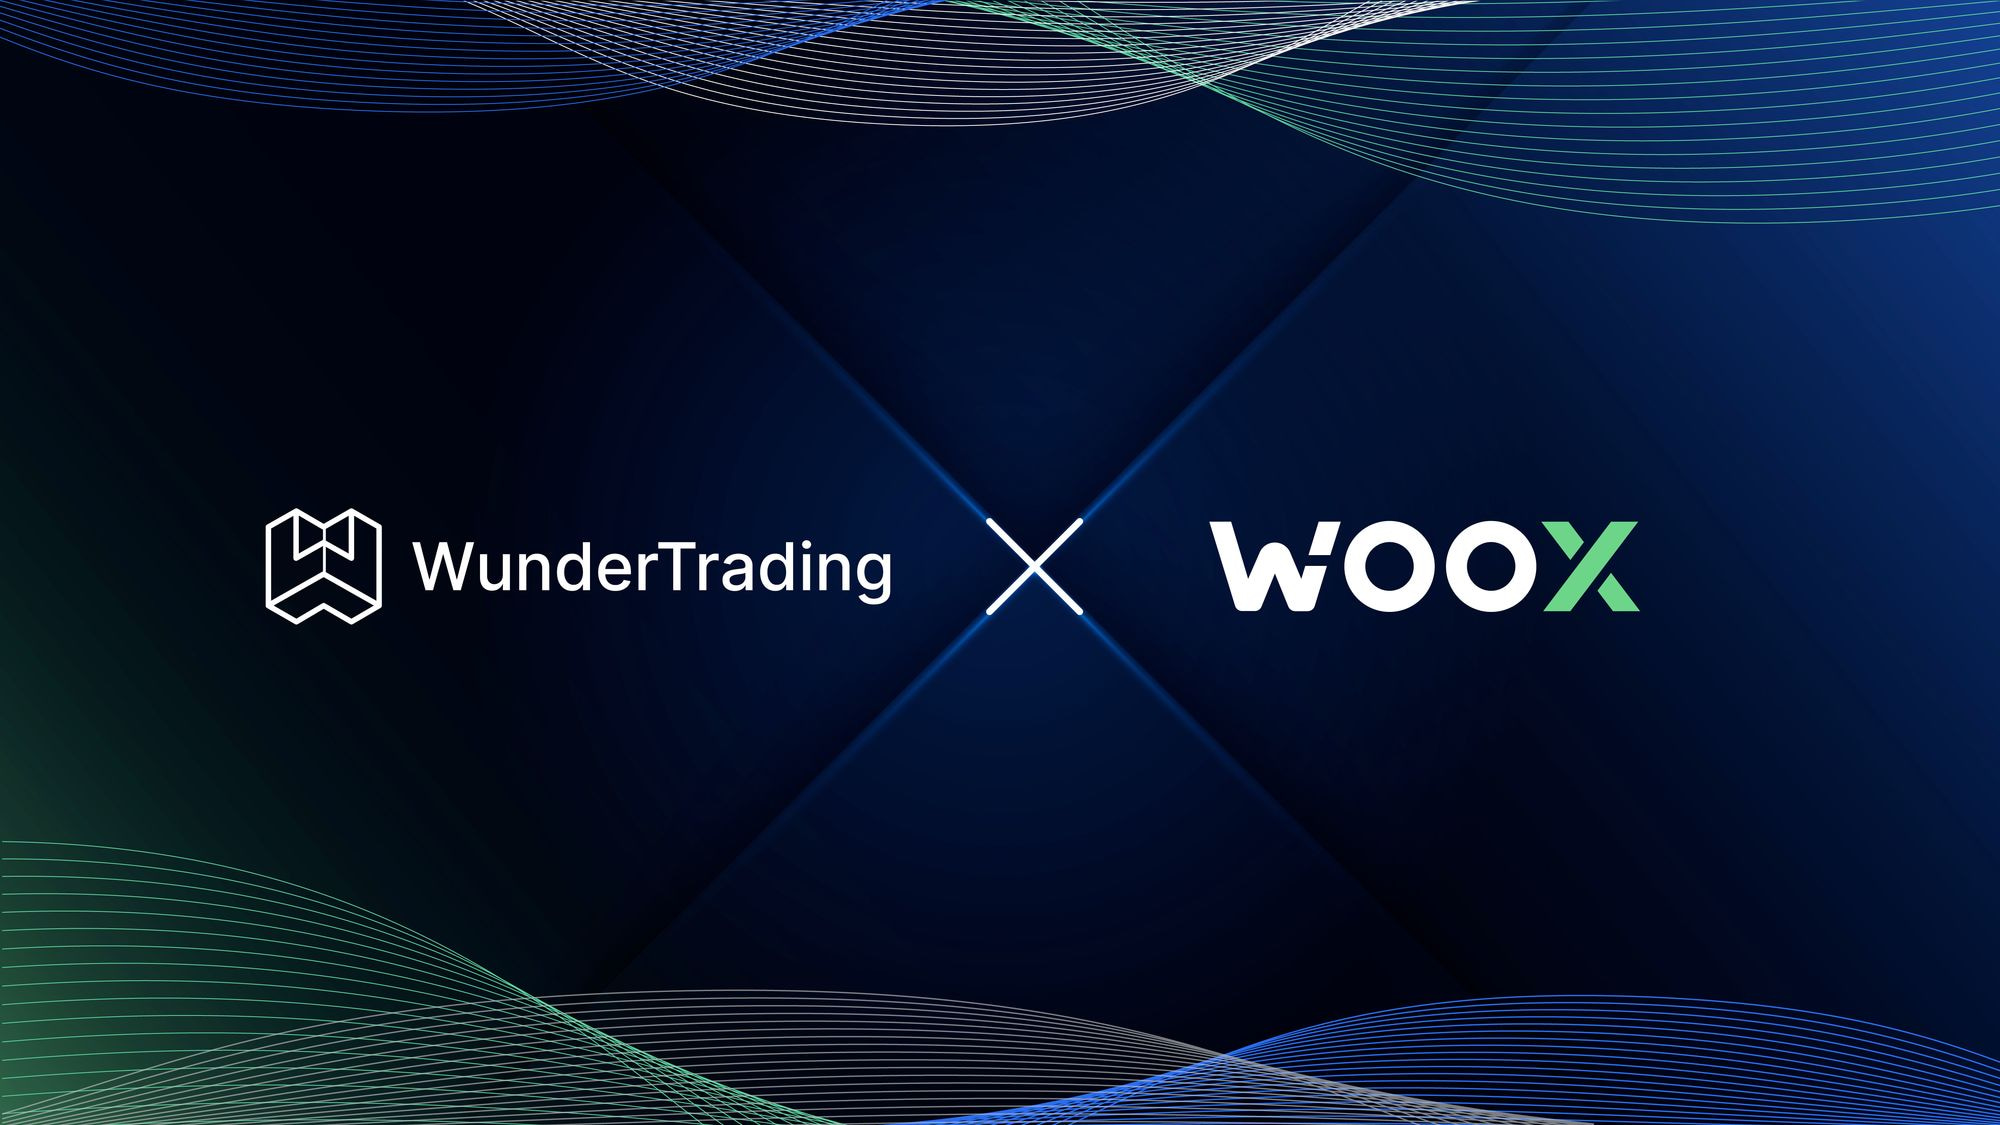 WOO X and WunderTrading integrate for superior copy-trade, optimum price execution